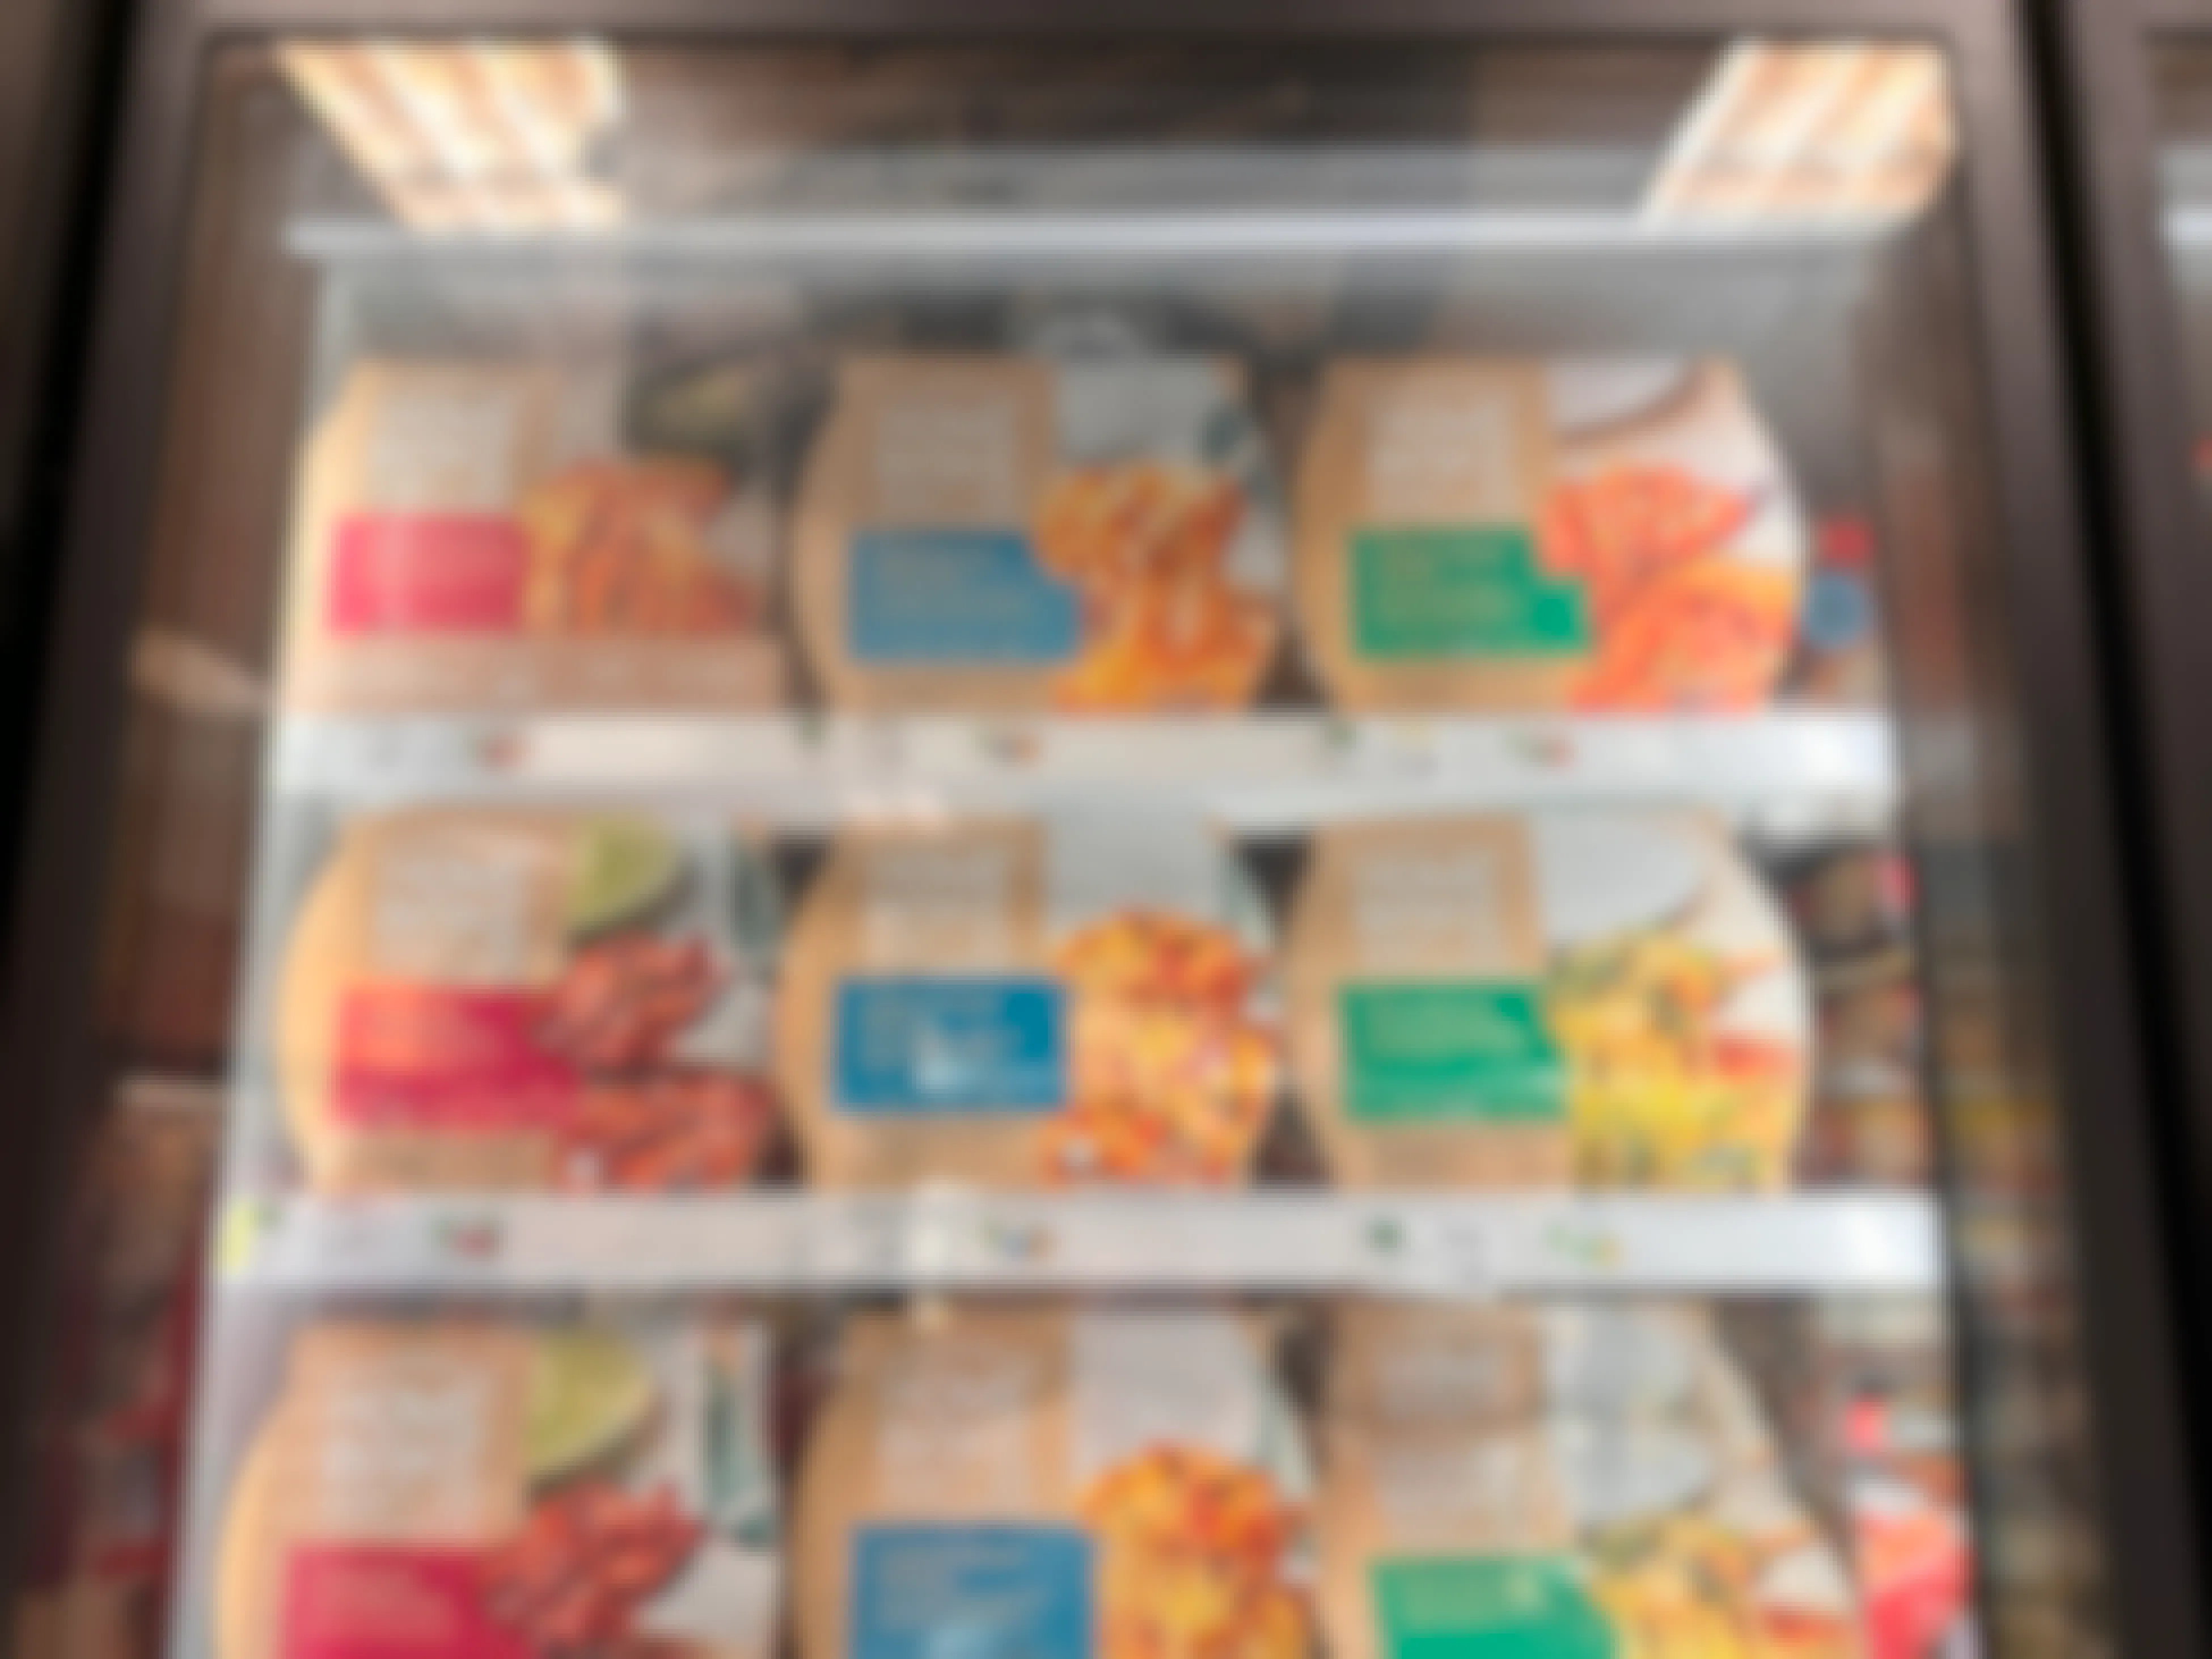 Different flavors of Home Bake meals in a store fridge